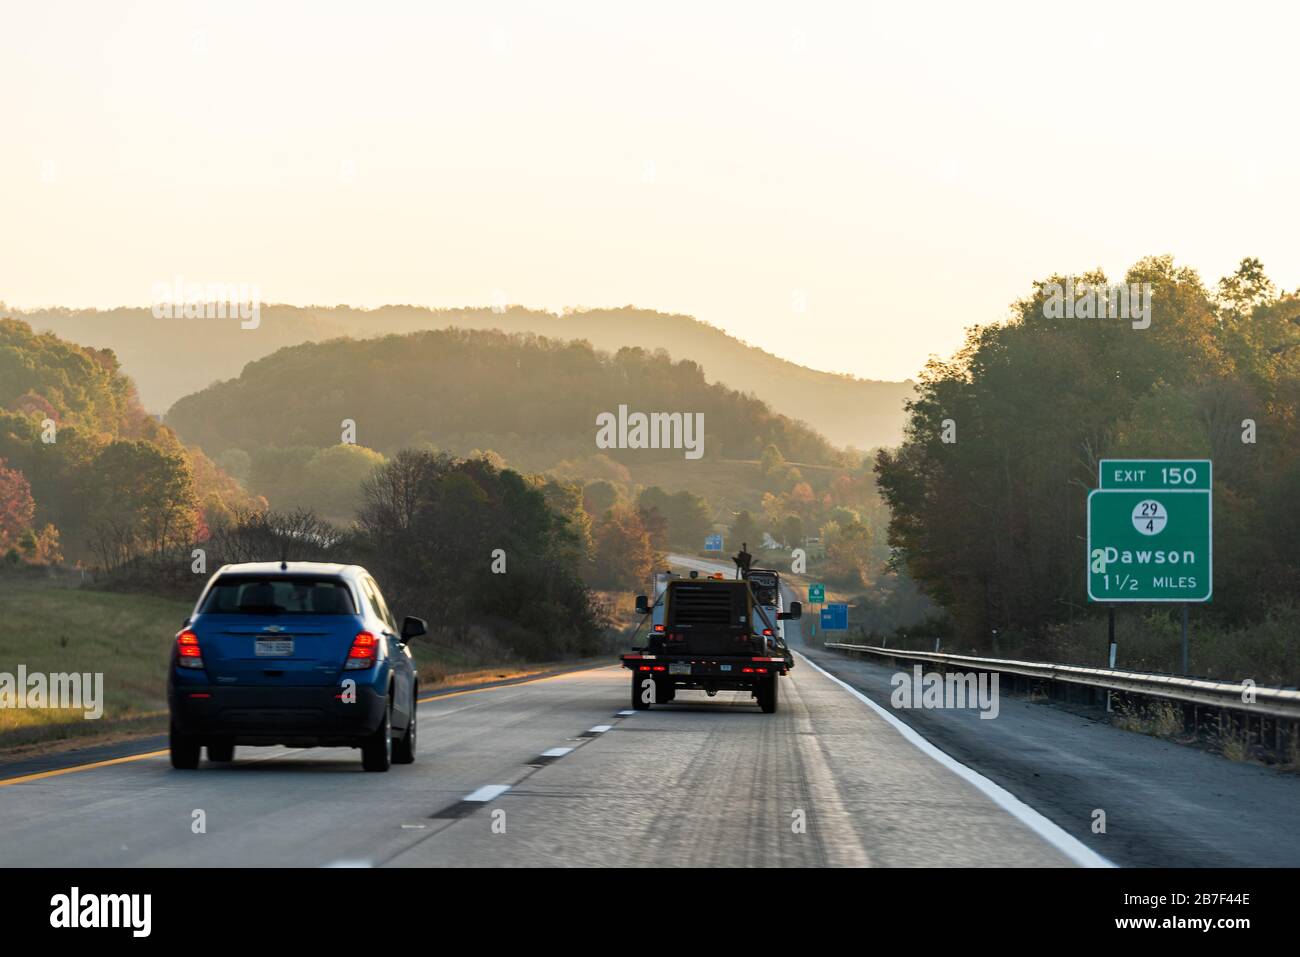 Dawson, USA - October 18, 2019: Fog mist road highway 64 driving in rural countryside in West Virginia with cars in traffic in morning sunrise sunligh Stock Photo